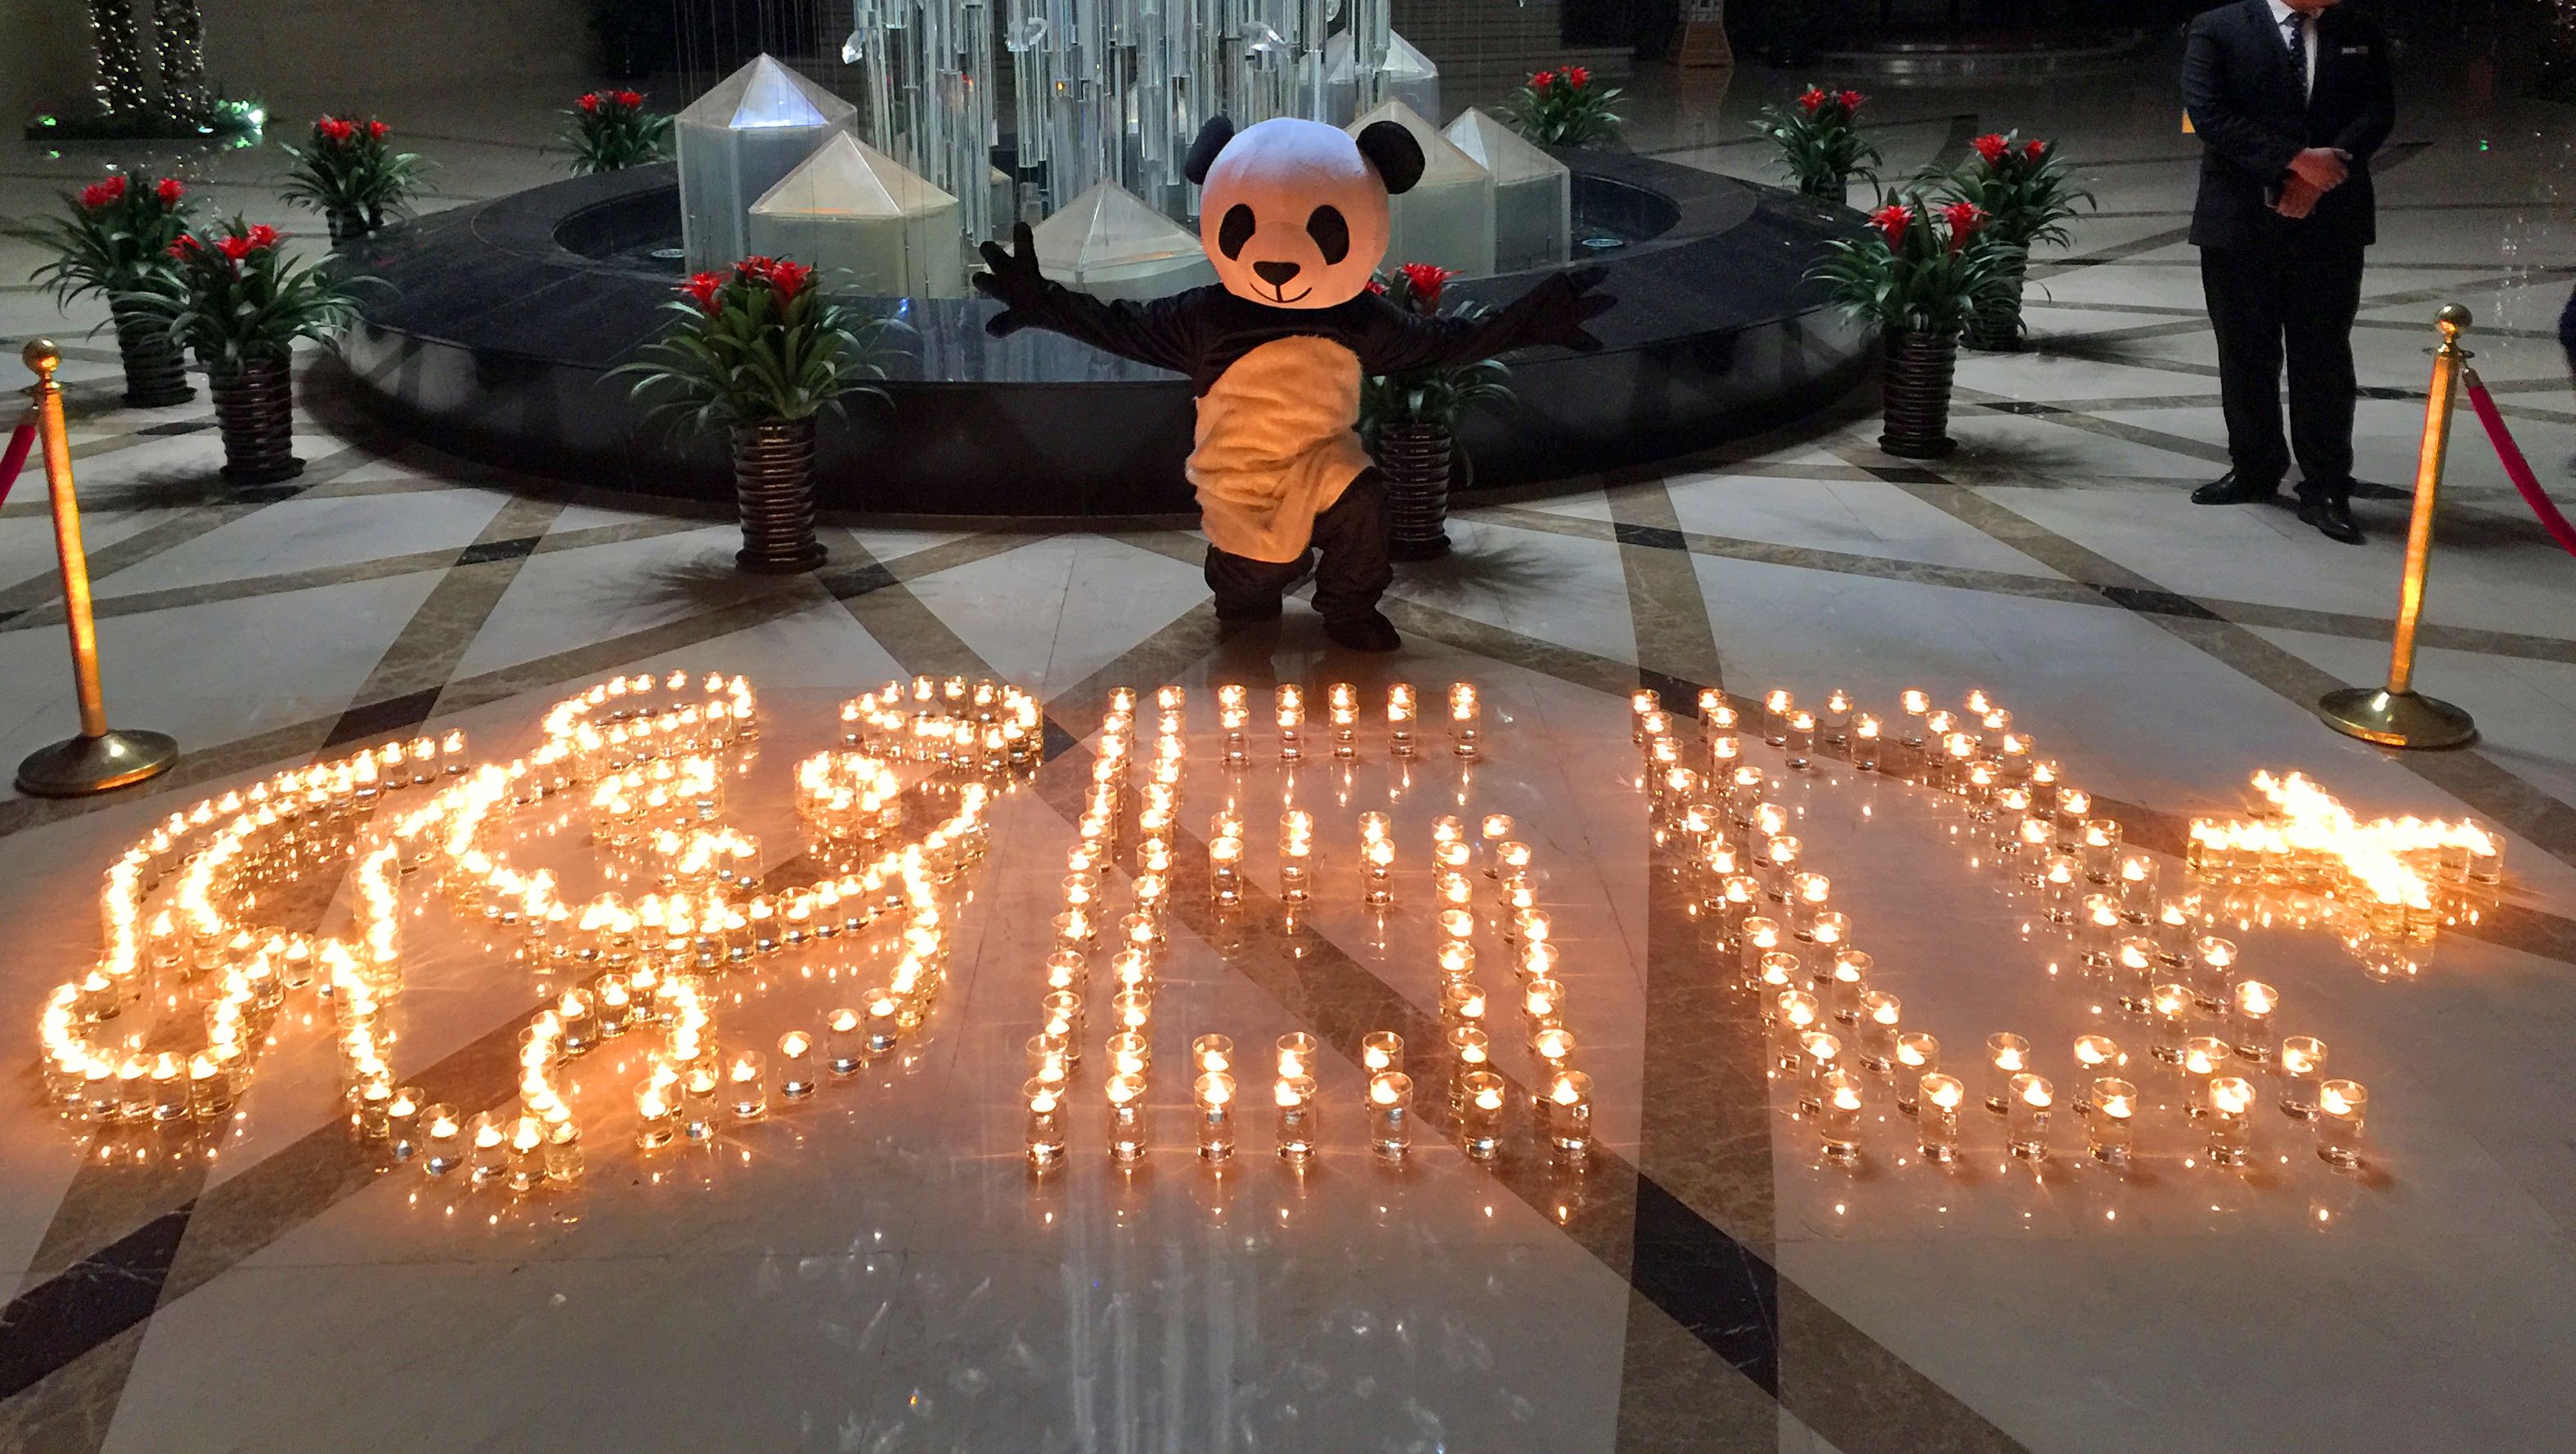 Staff member wearing panda costume poses with candles in Yantai, Shandong Province of China.